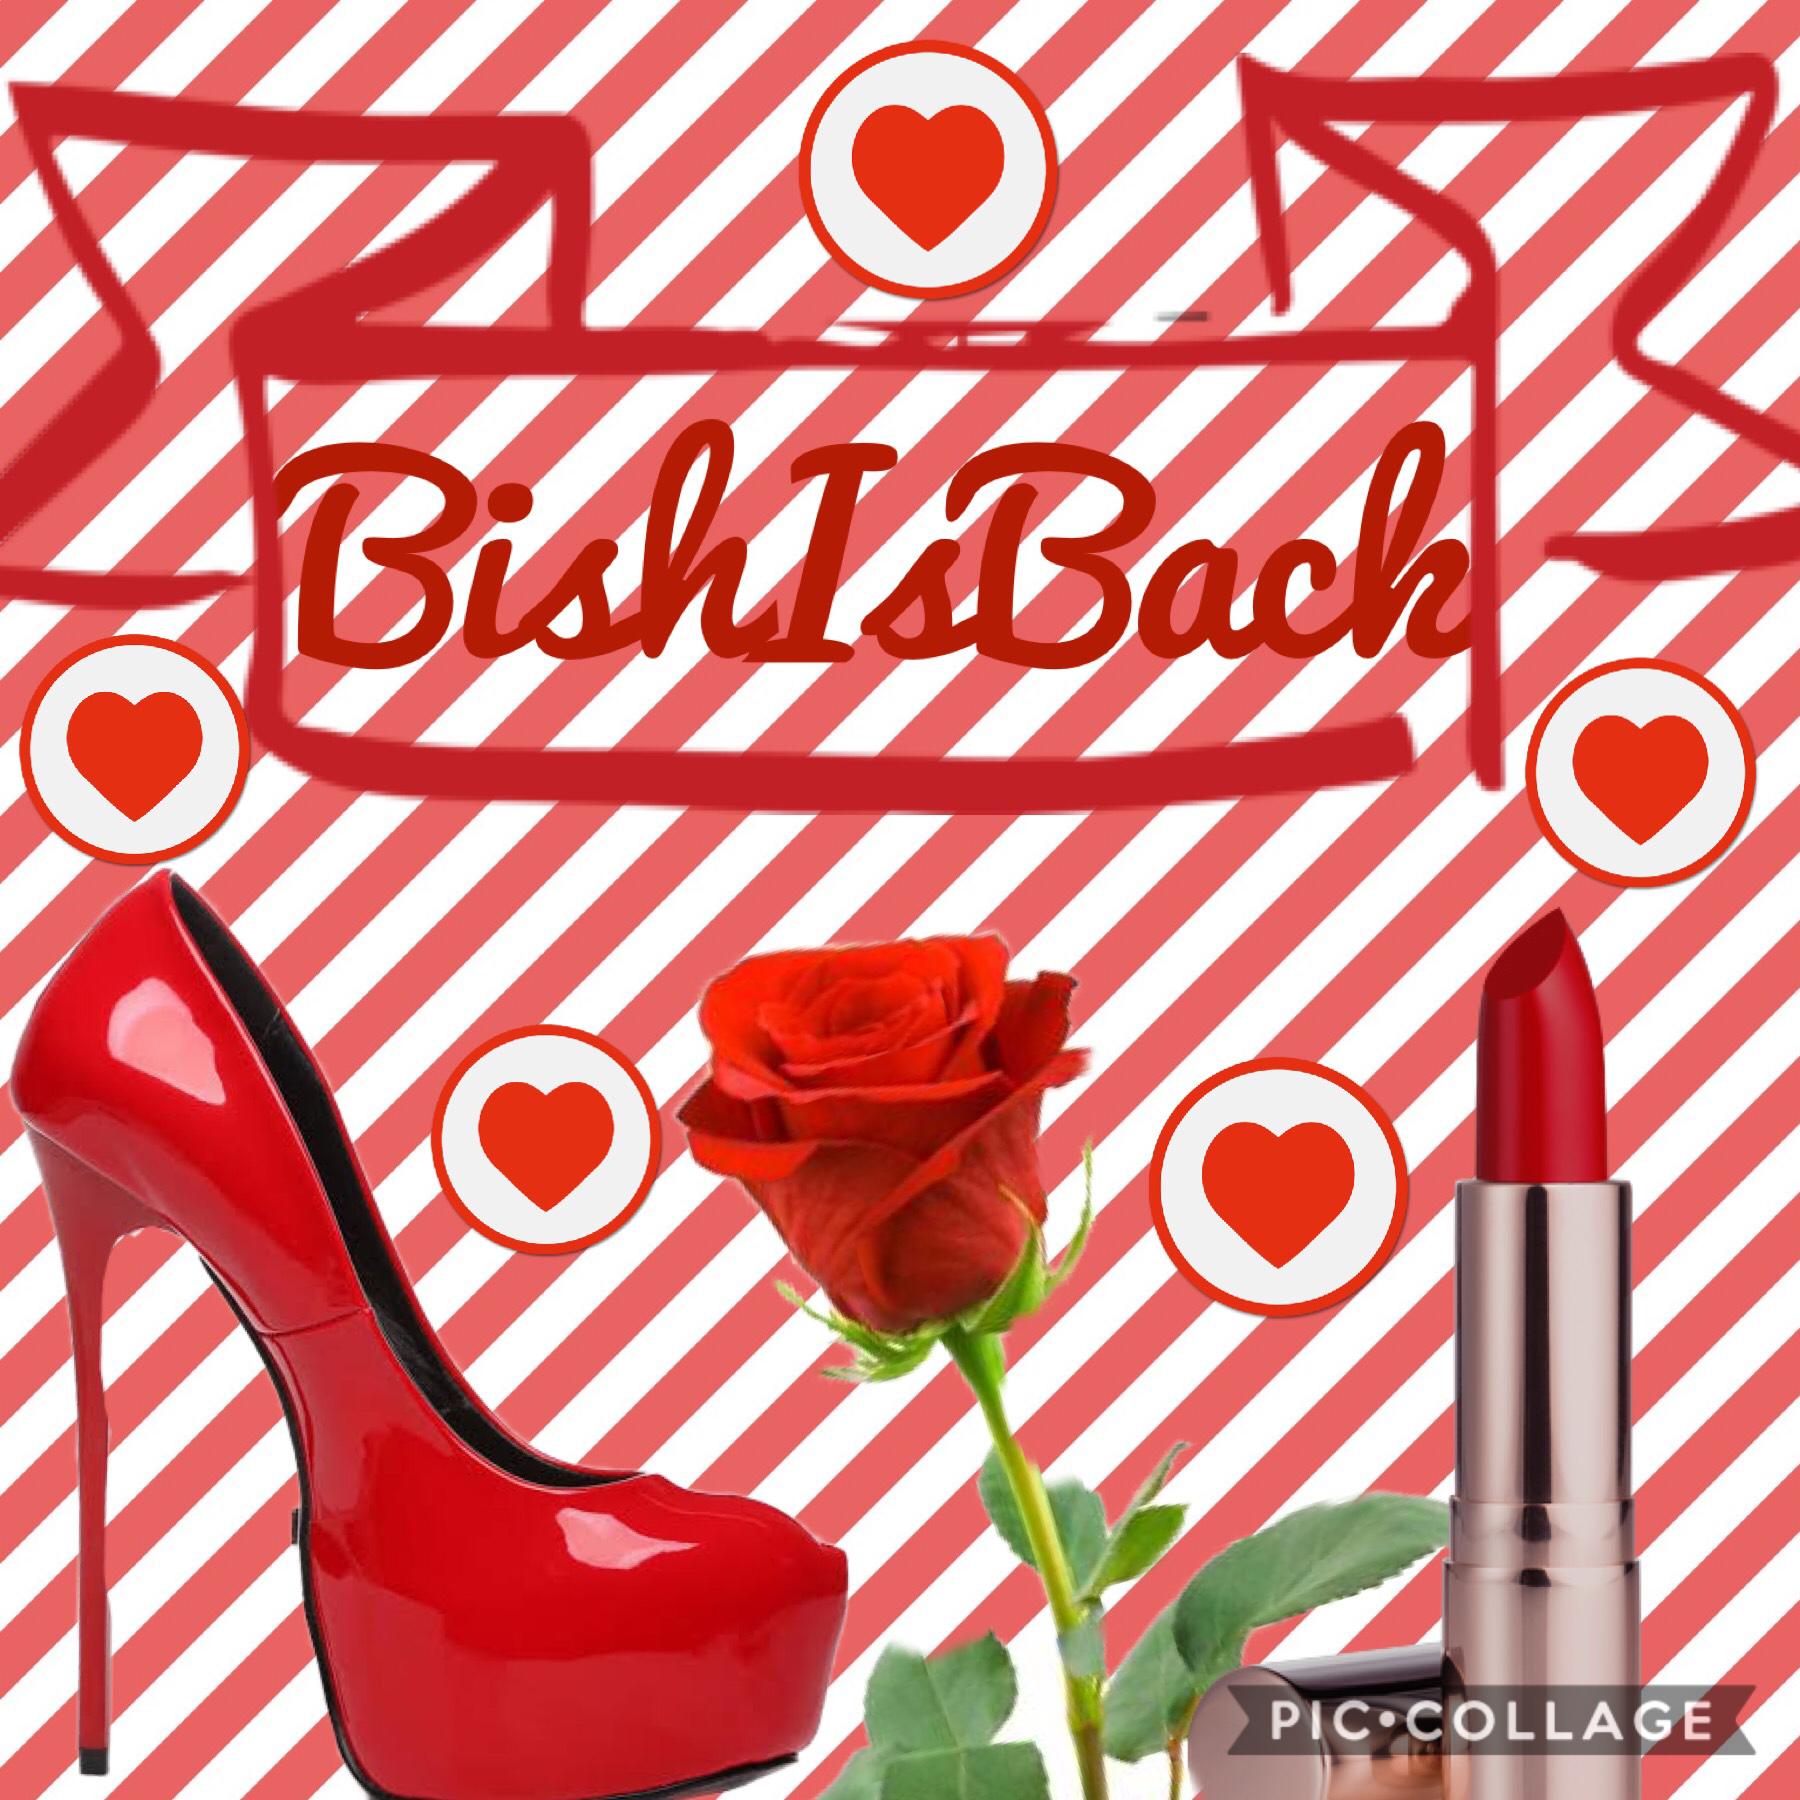 Hey guys, as promised this is a shoutout to BishIsBack she is new to PicCollage, so go show her some support! ❤️🧡💛💚💙💜🖤💗